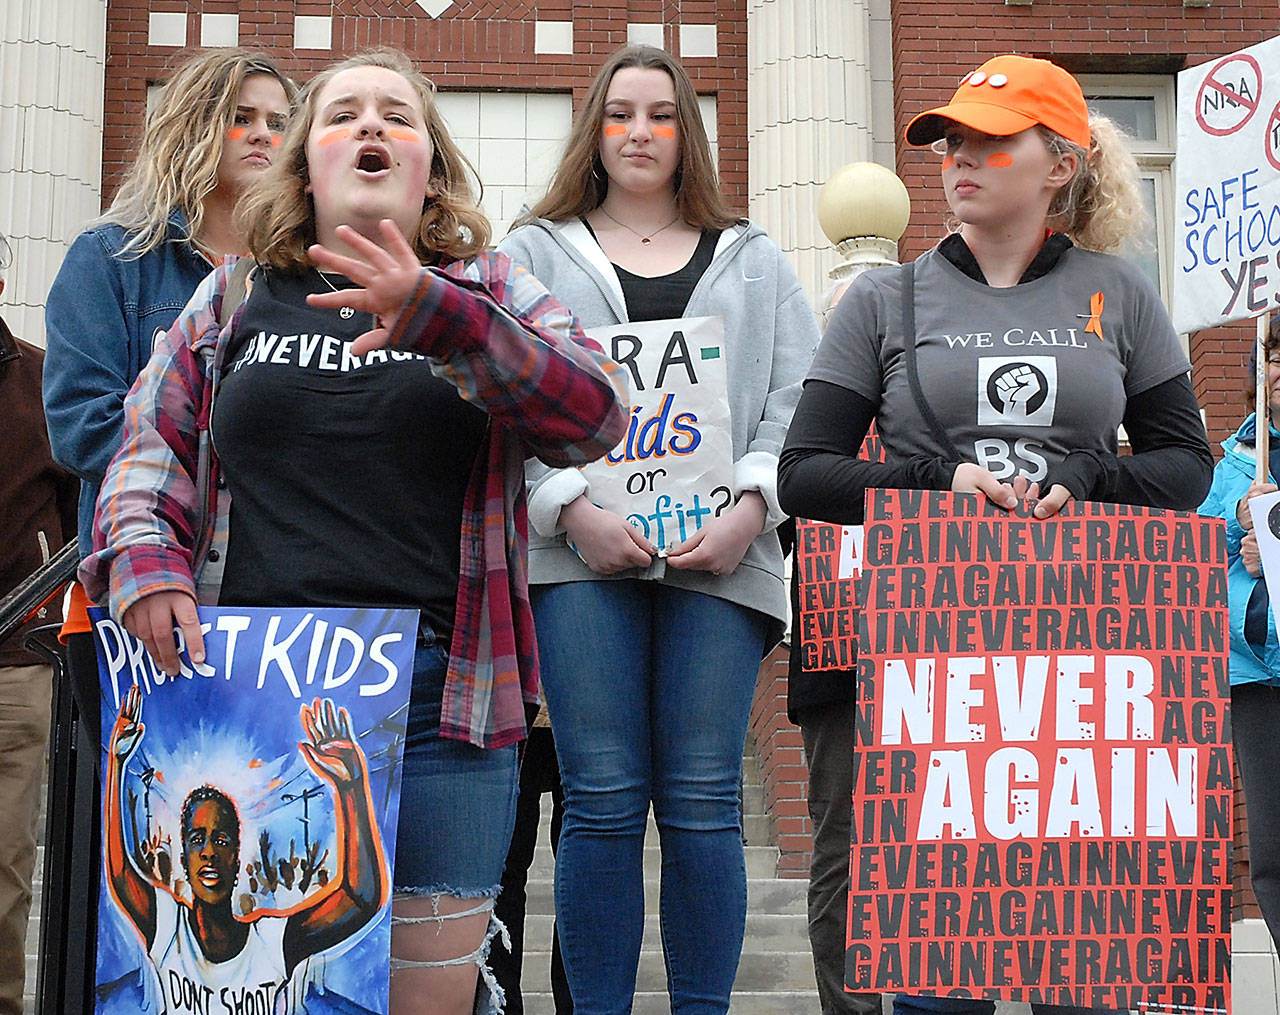 Port Angeles High School student Elizabeth Watkins, 18, second from left, talks about active-shooter drills at her school during an march and rally for sensible gun laws on Friday. Among those accompanying Watkins on the Clallam County Courthouse steps were fellow students, from left, Lily Robertson, 17, Jera Taylor, 16, and Emily Menshew, 17. (Keith Thorpe/Peninsula Daily News)